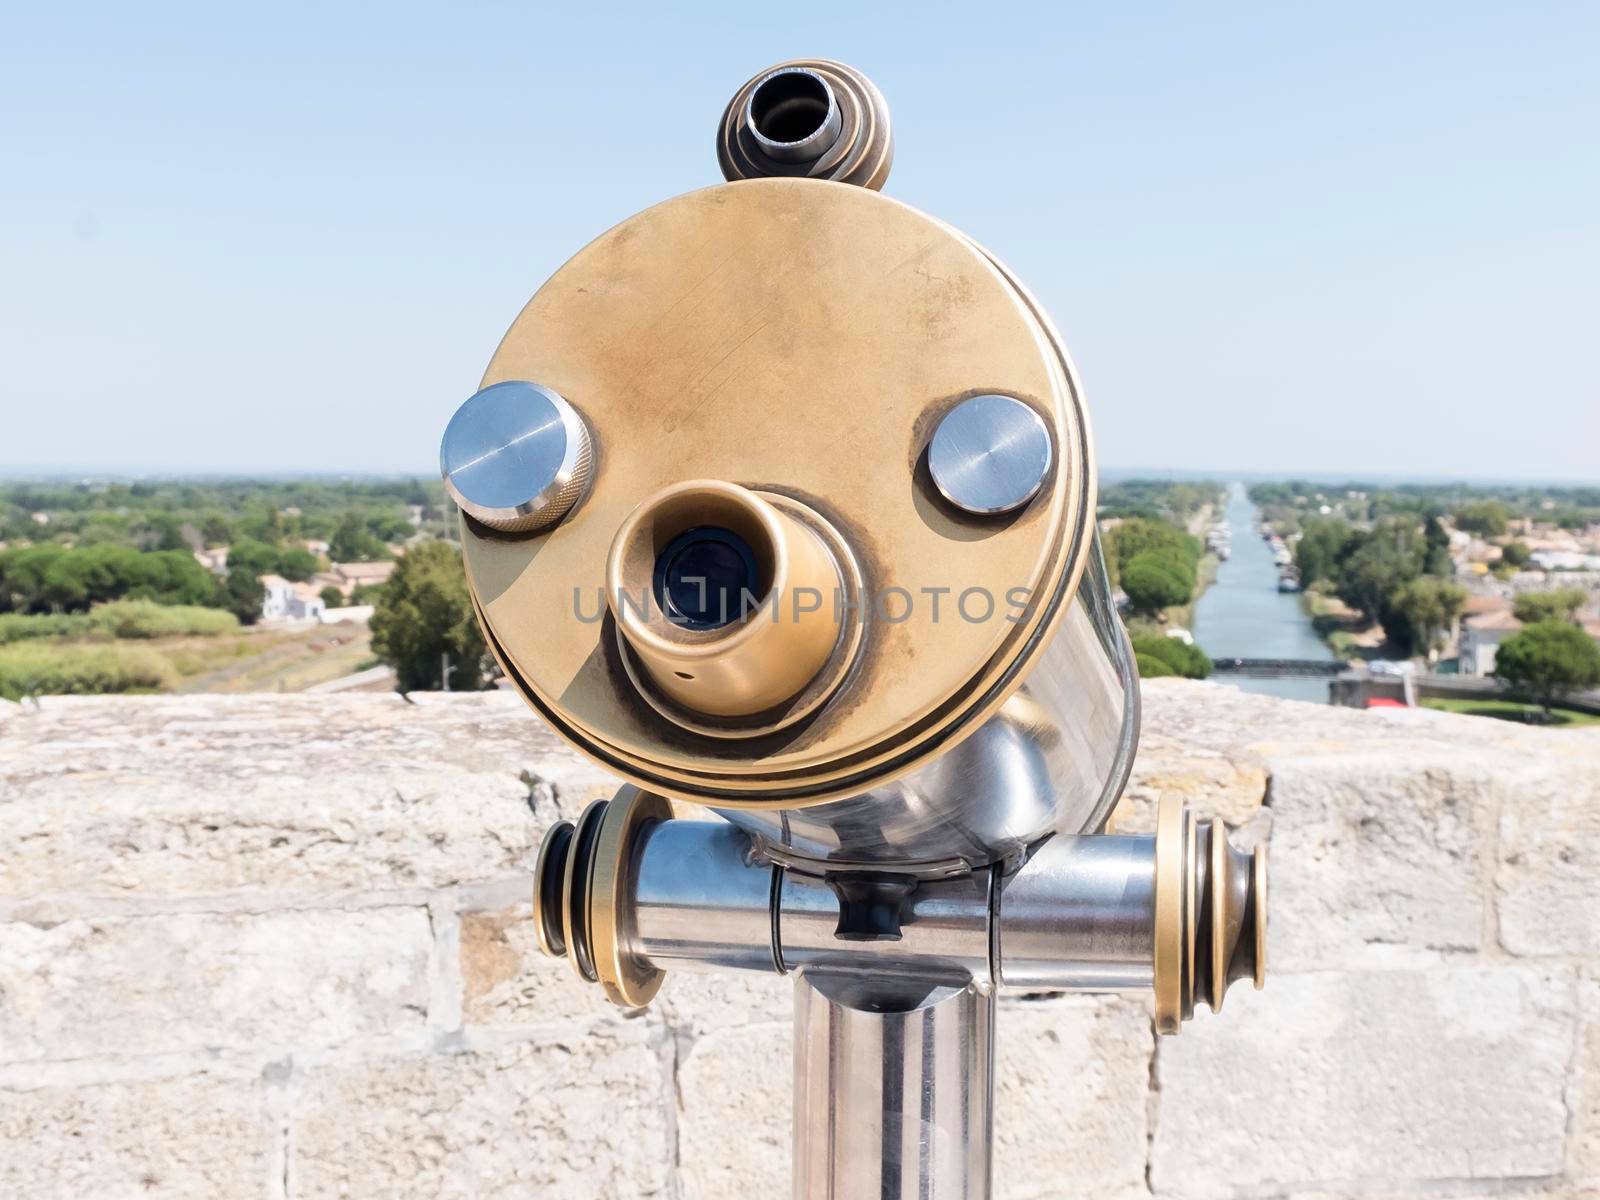 Coin-operated binoculars looking out over a river landscape